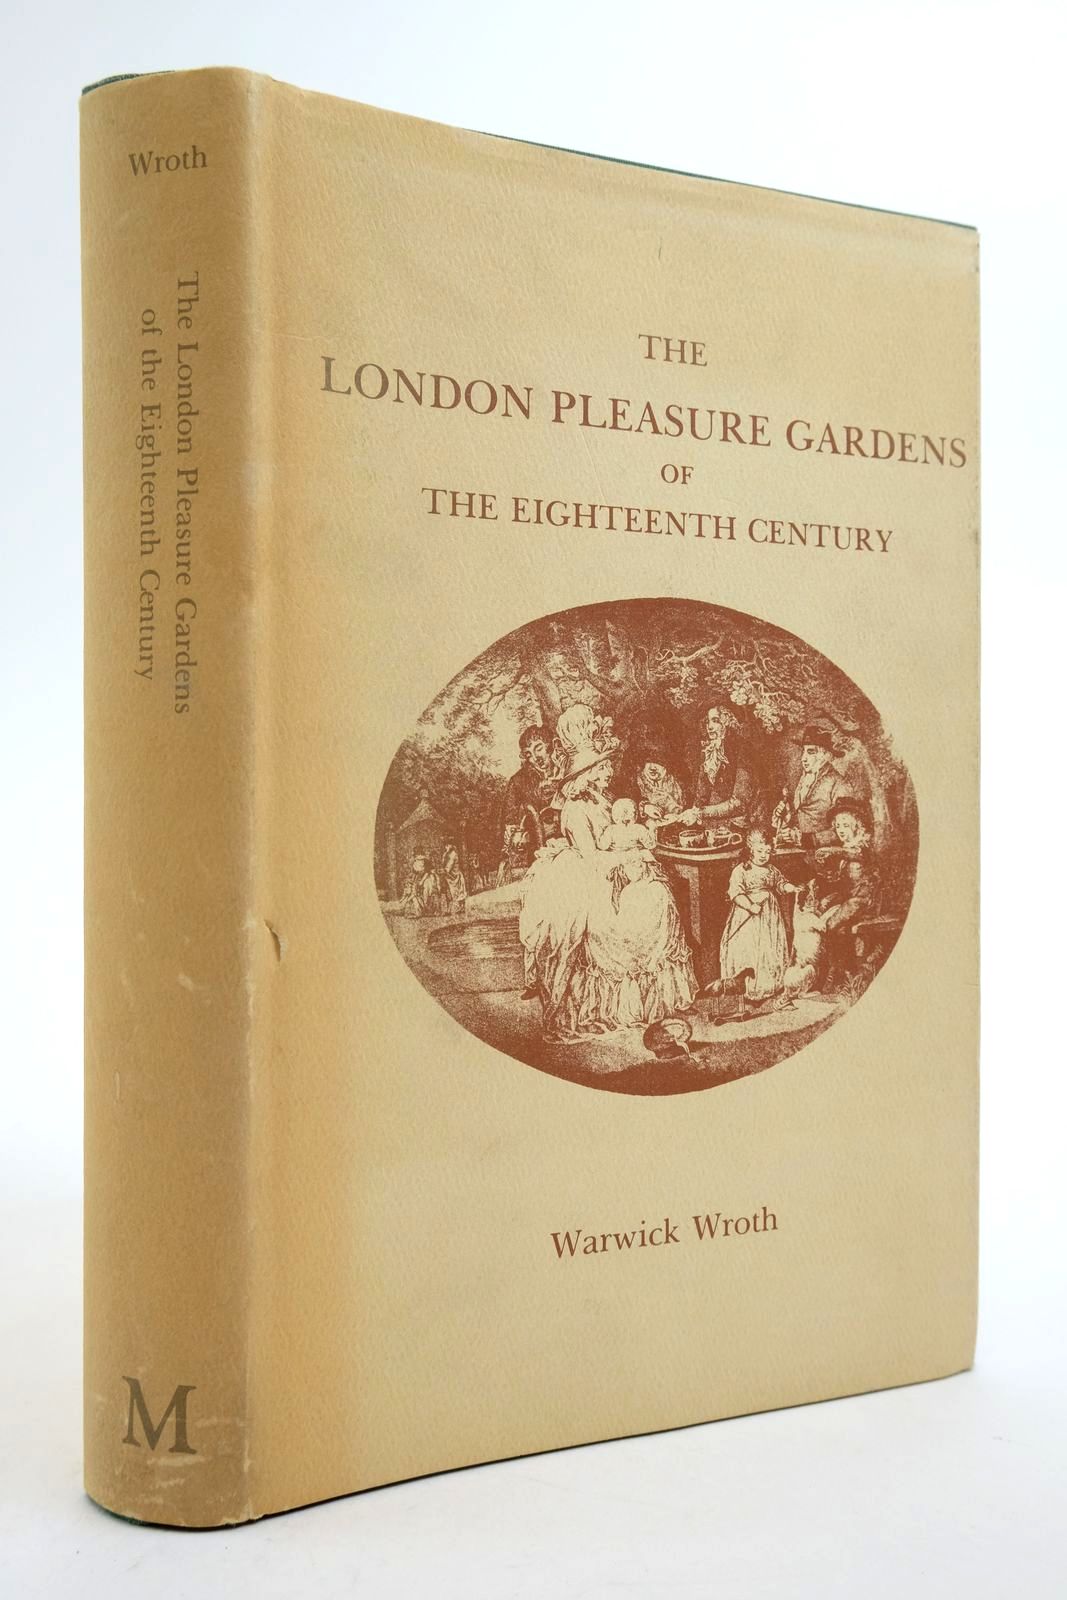 Photo of THE LONDON PLEASURE GARDENS OF THE EIGHTEENTH CENTURY written by Wroth, Warwick Wroth, Arthur Edgar Saxon, A.H. published by The Macmillan Press Ltd. (STOCK CODE: 2138964)  for sale by Stella & Rose's Books